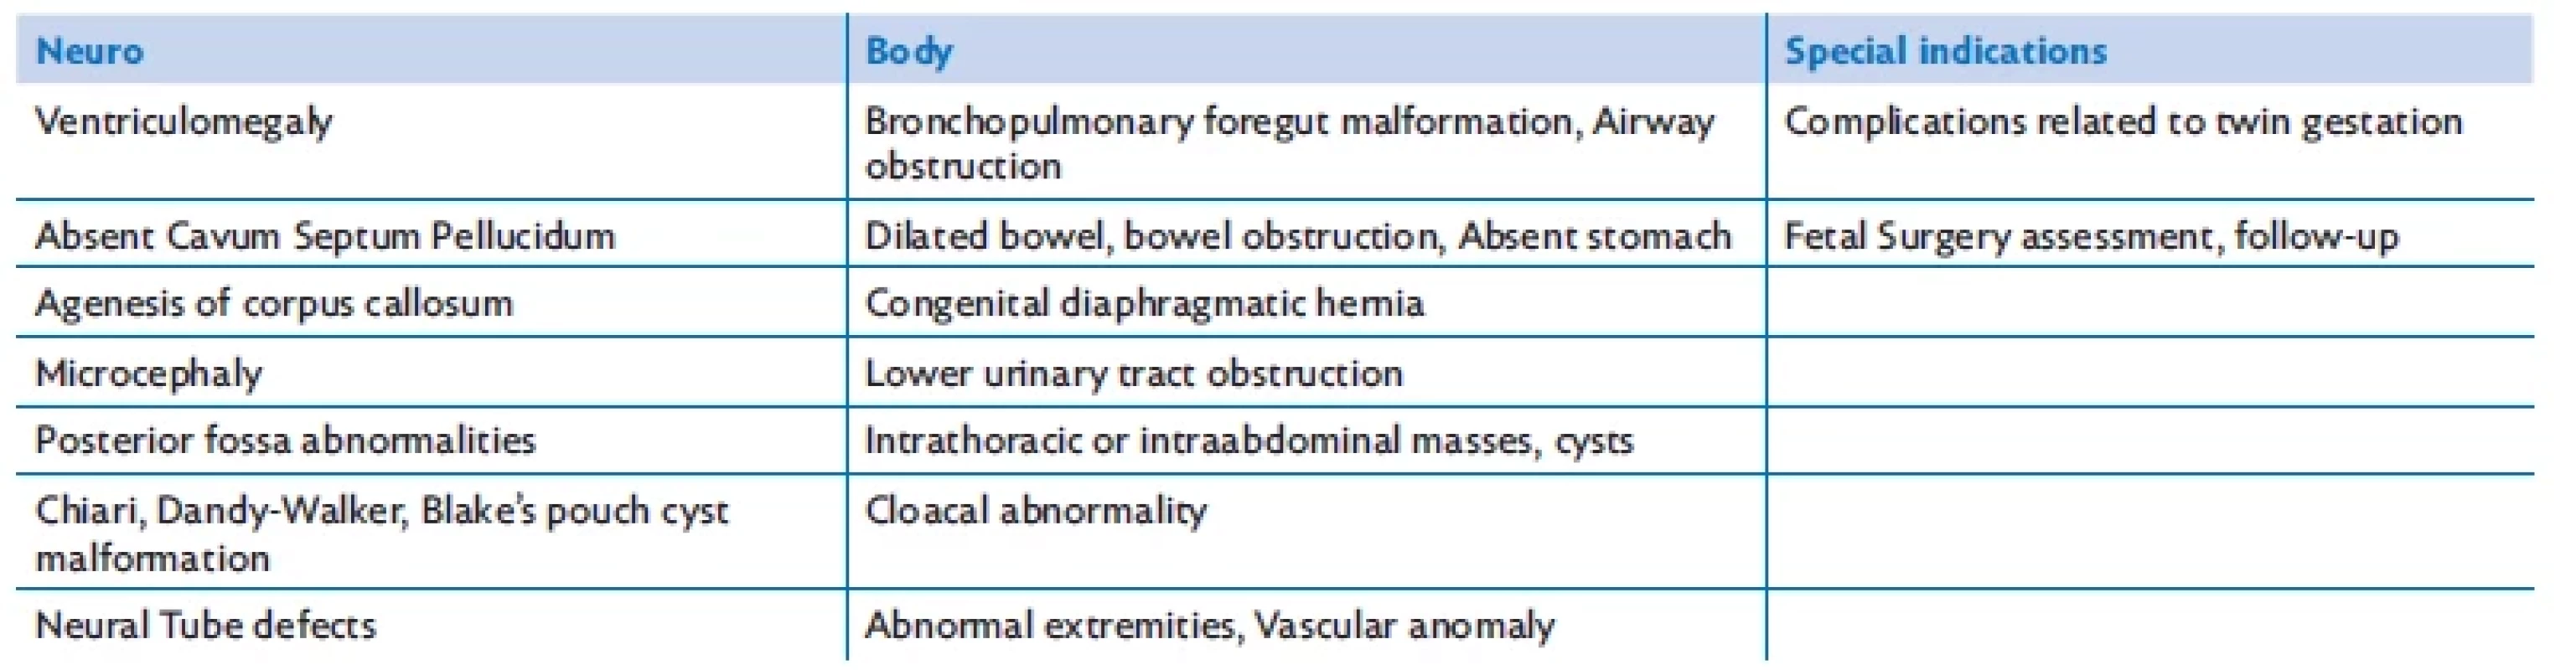 Common indications for fetal MRI